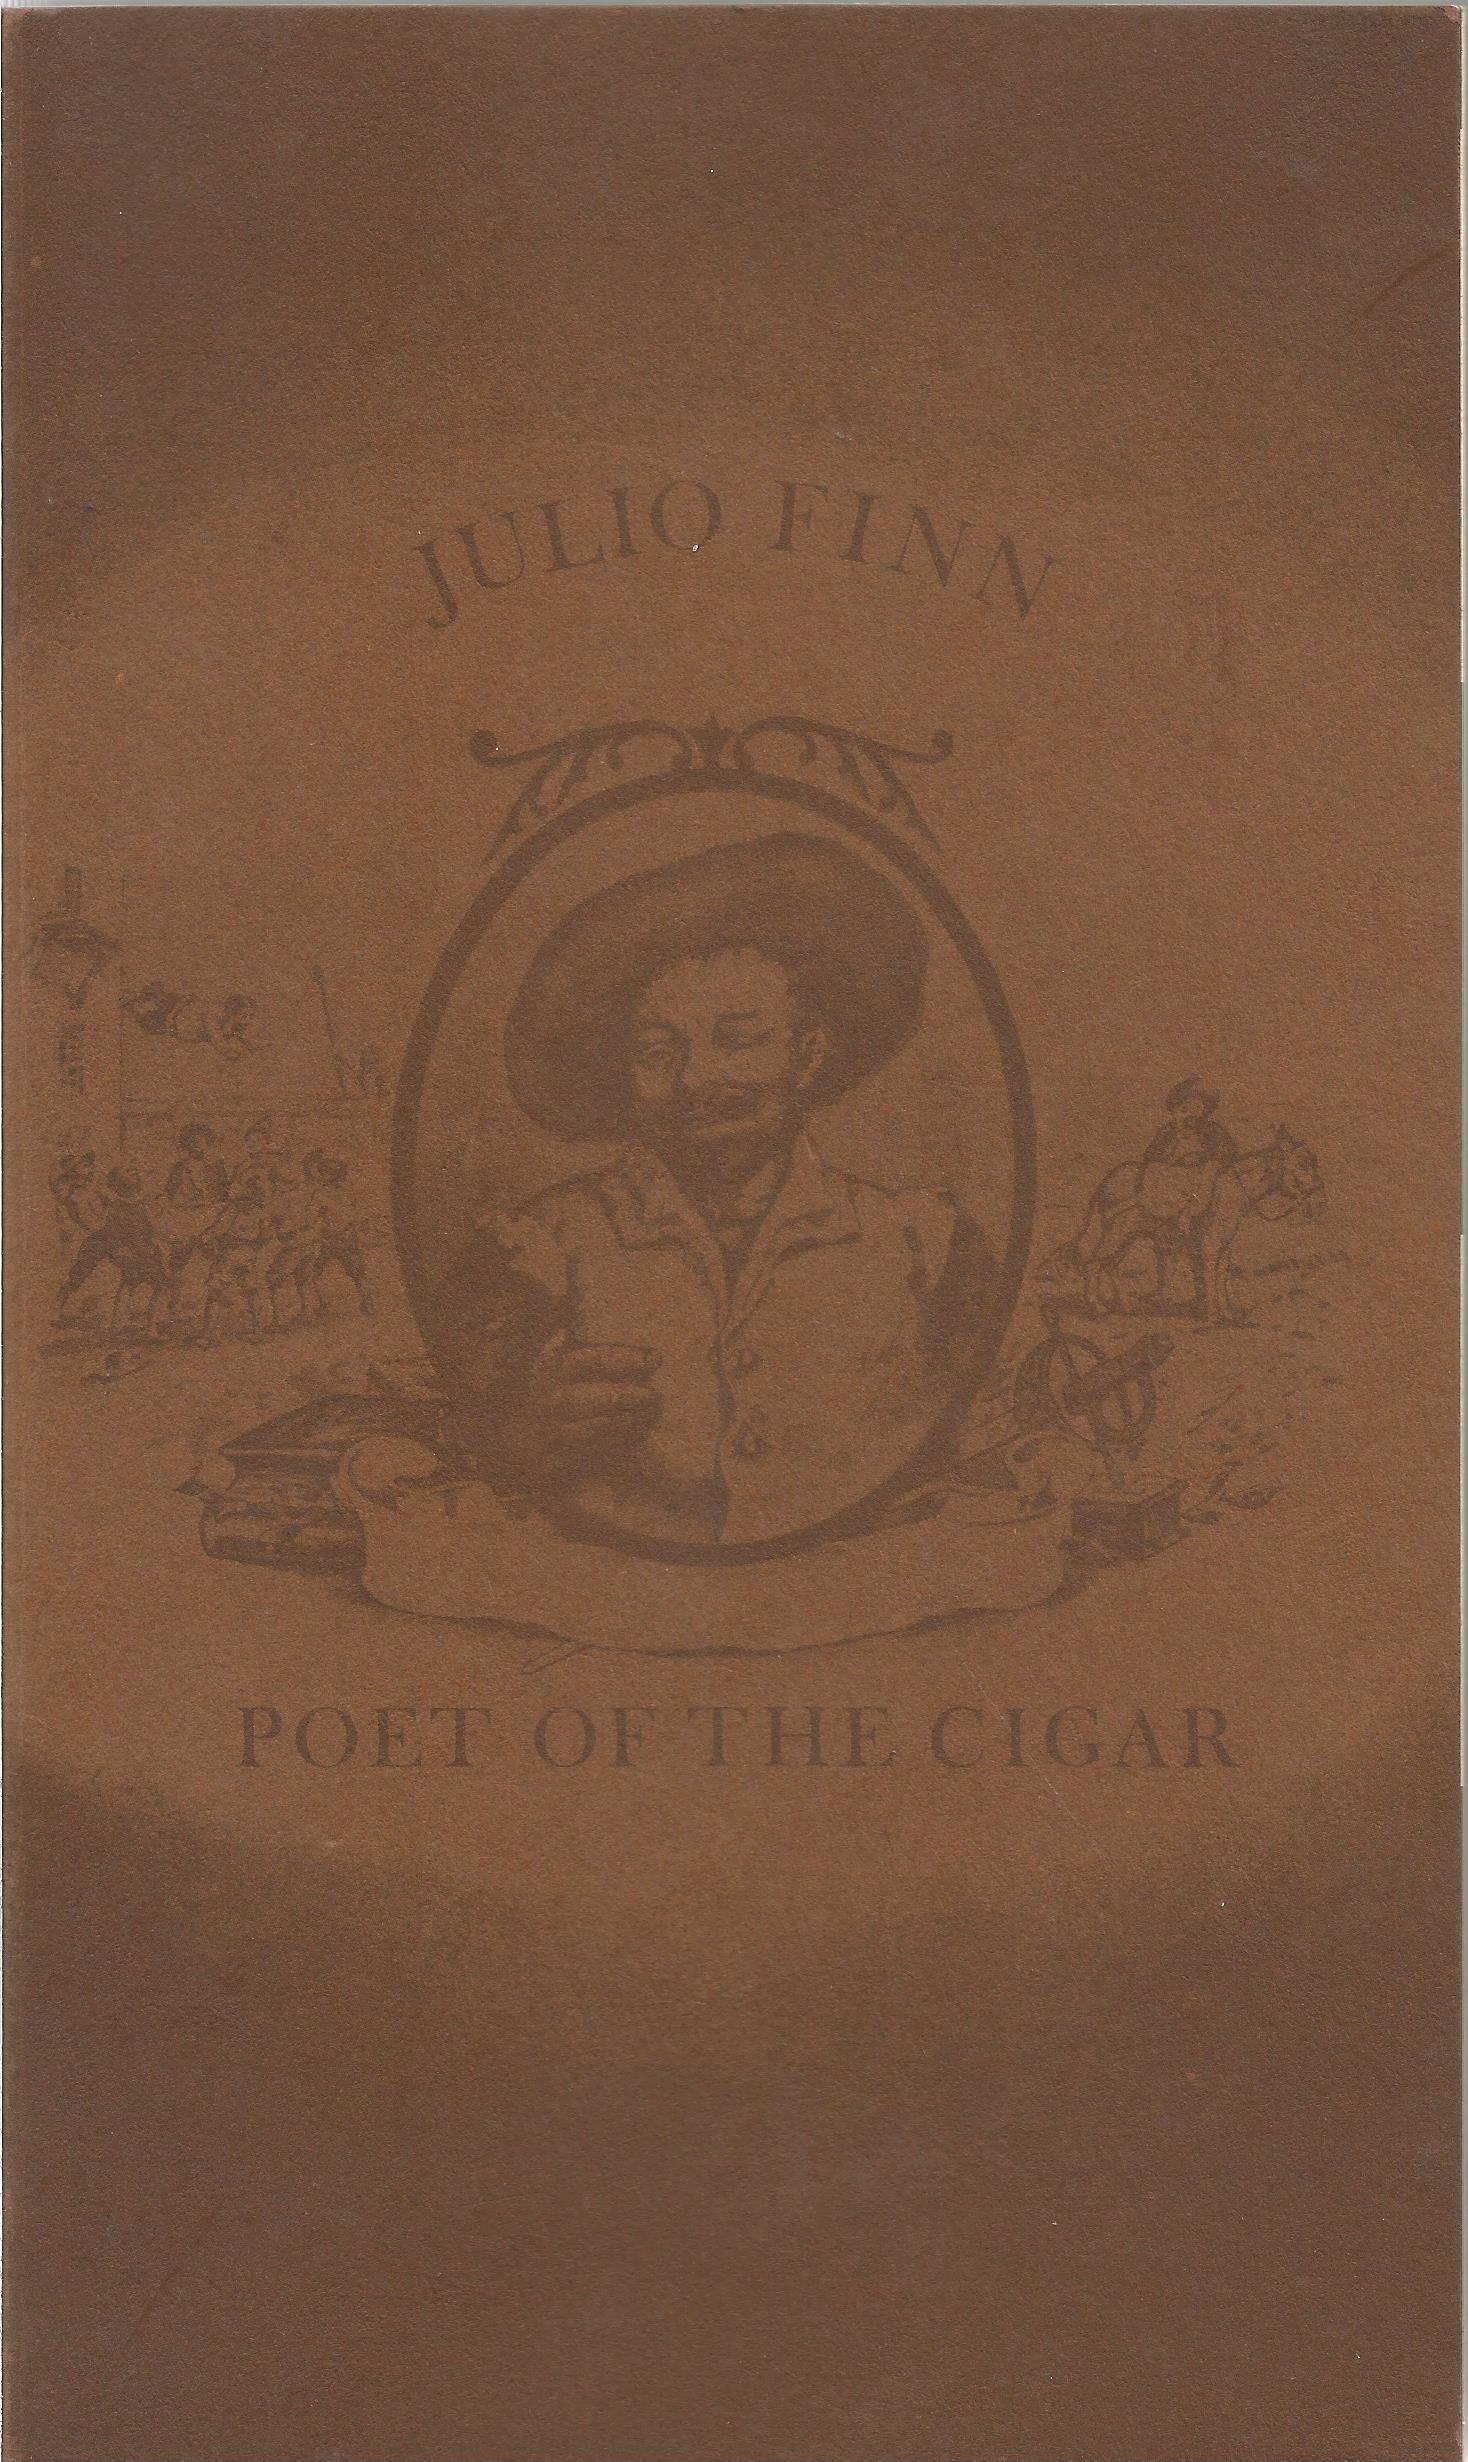 Julio Finn Paperback Book Poet of the Cigar signed by the Author on the Title Page dedicated to Mike